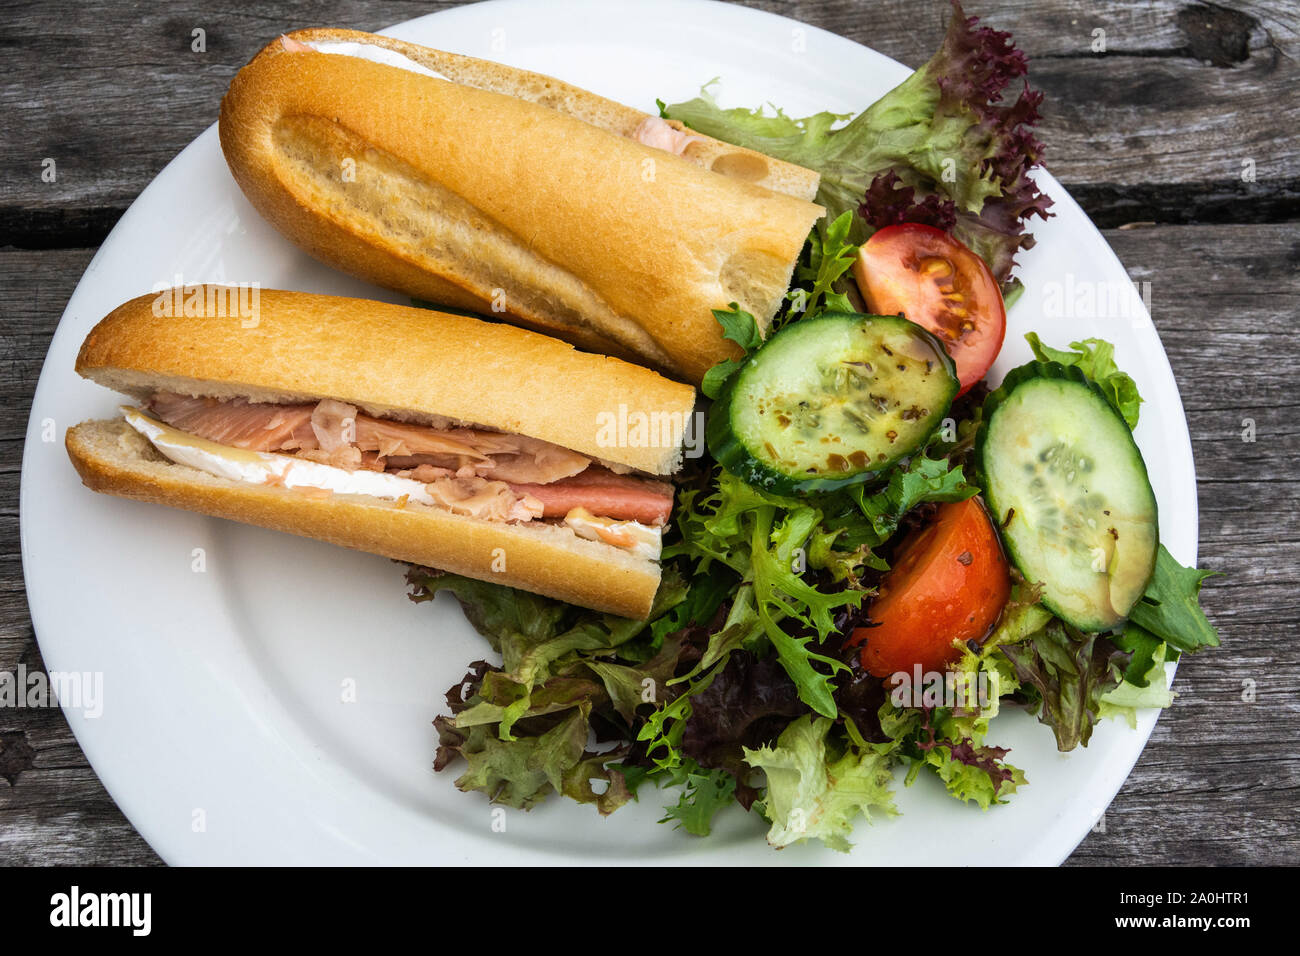 Fish and cheese sandwich with salad, in Australia. Stock Photo